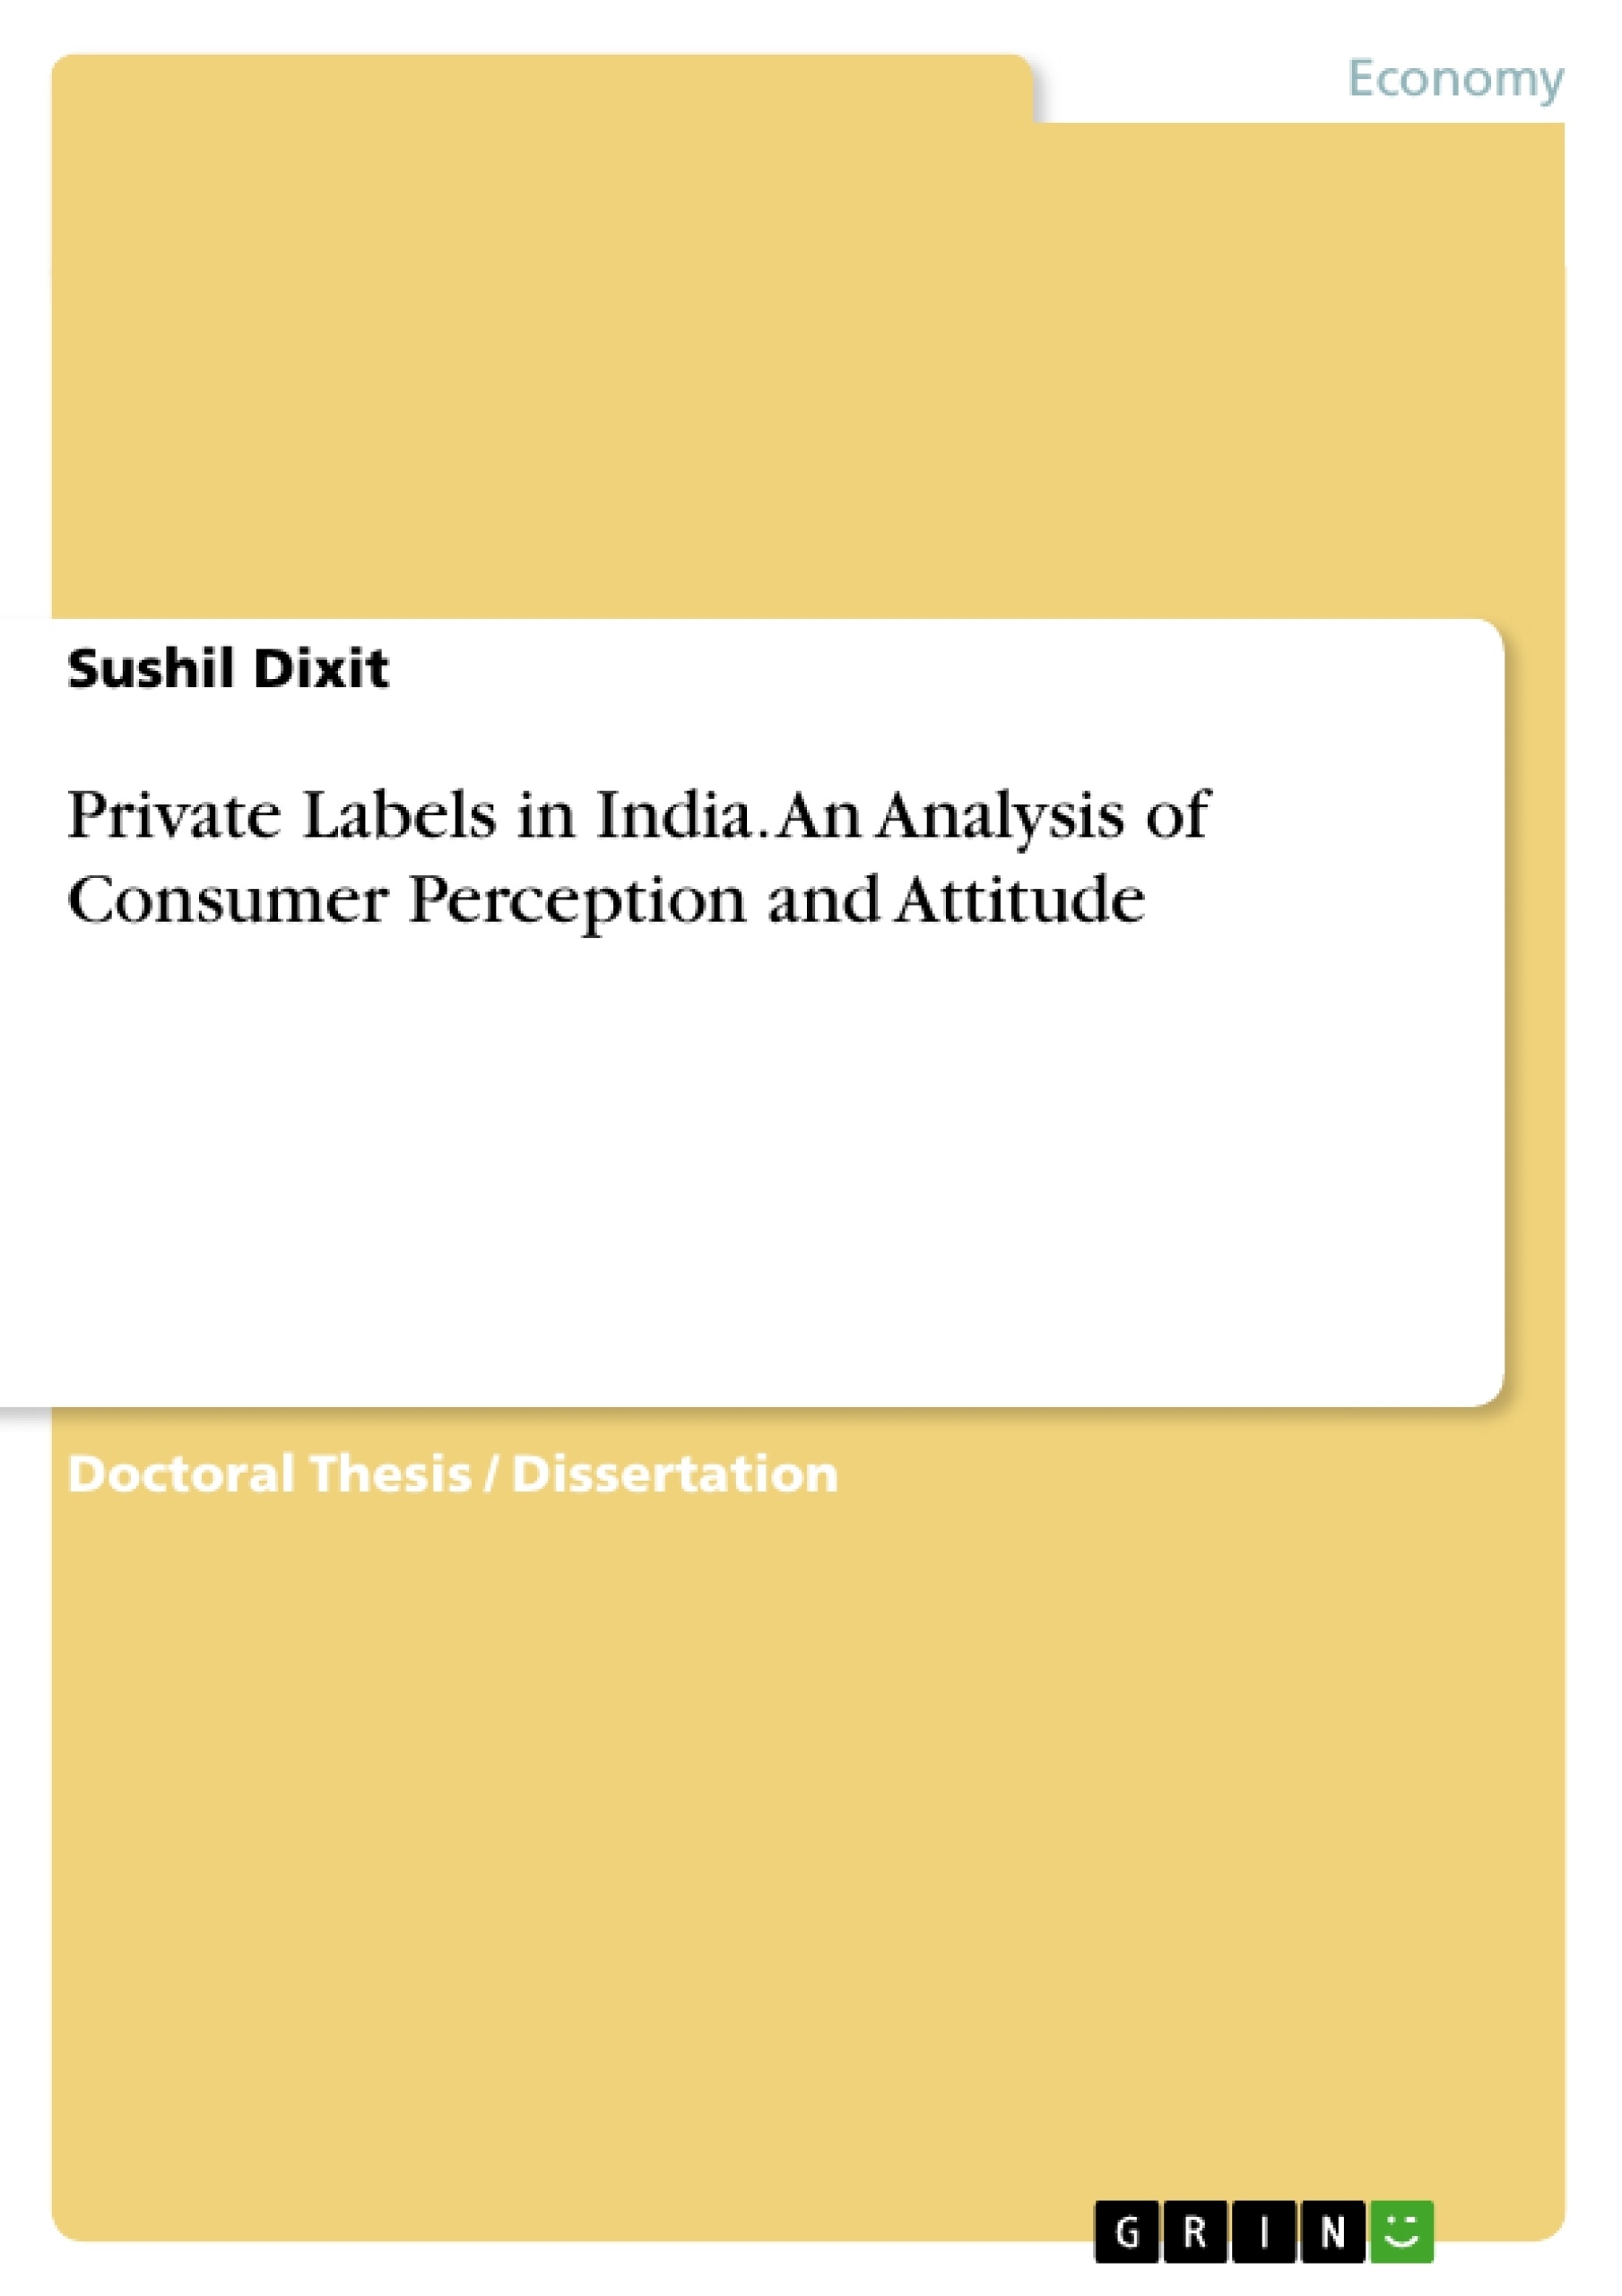 Title: Private Labels in India. An Analysis of Consumer Perception and Attitude